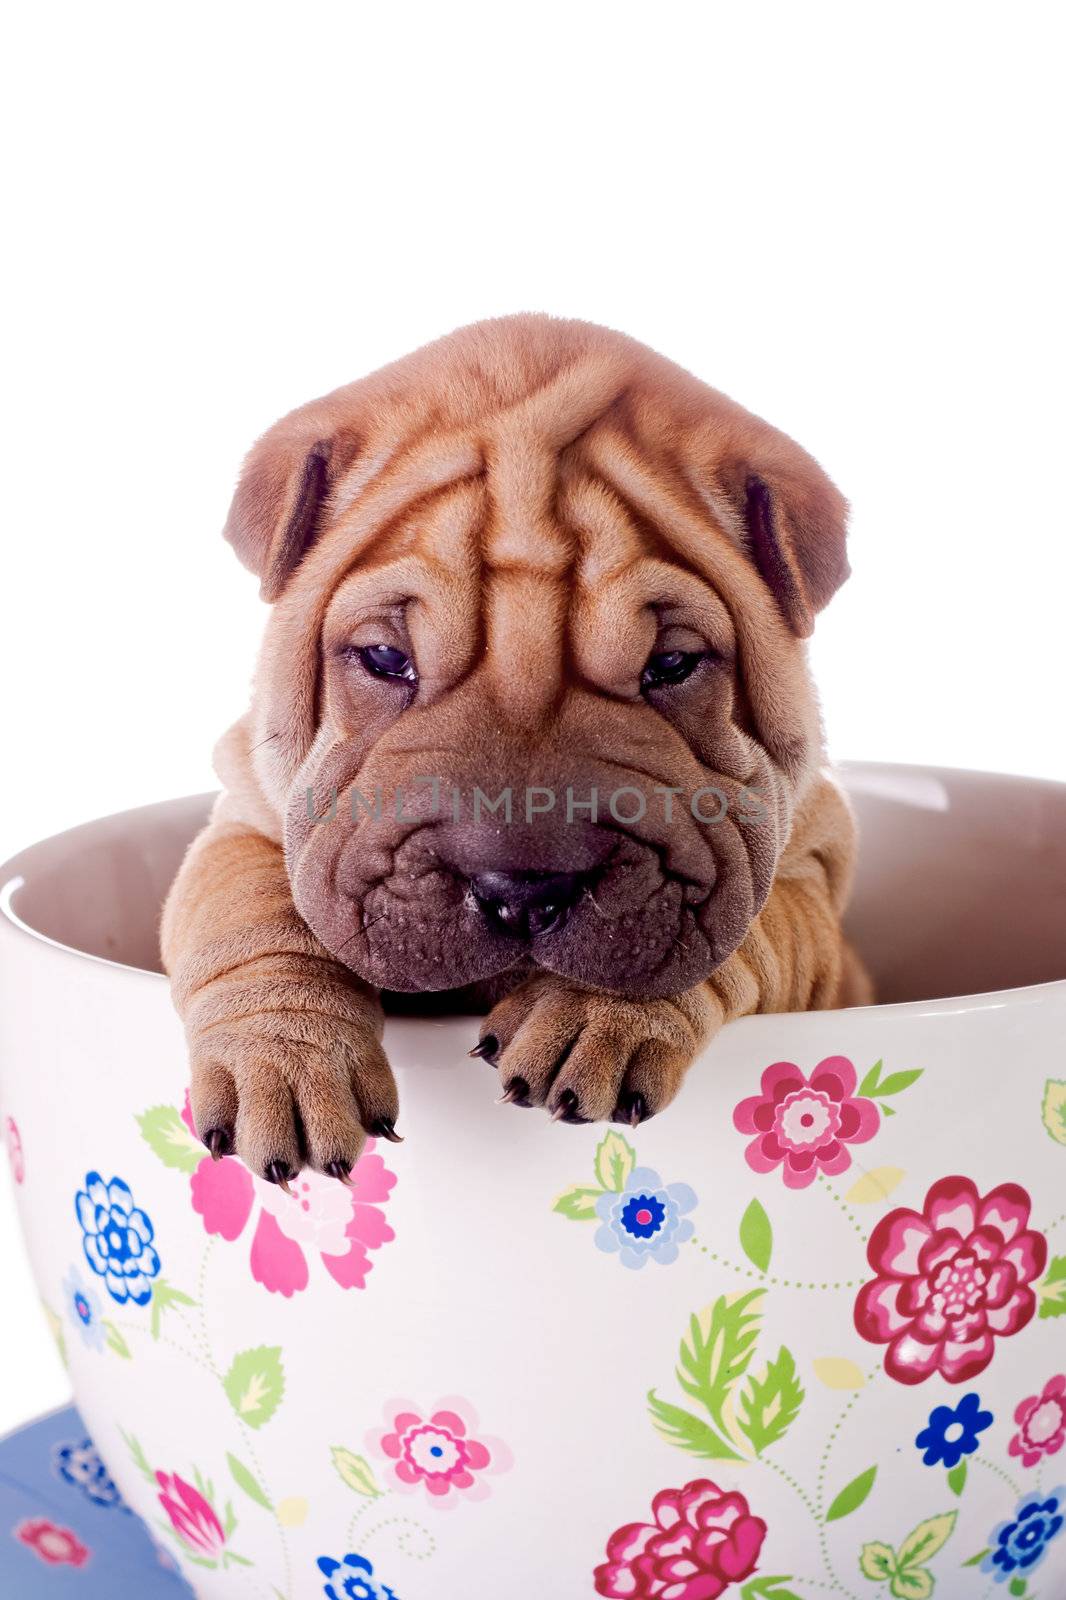 Shar Pei baby dog, almost one month old